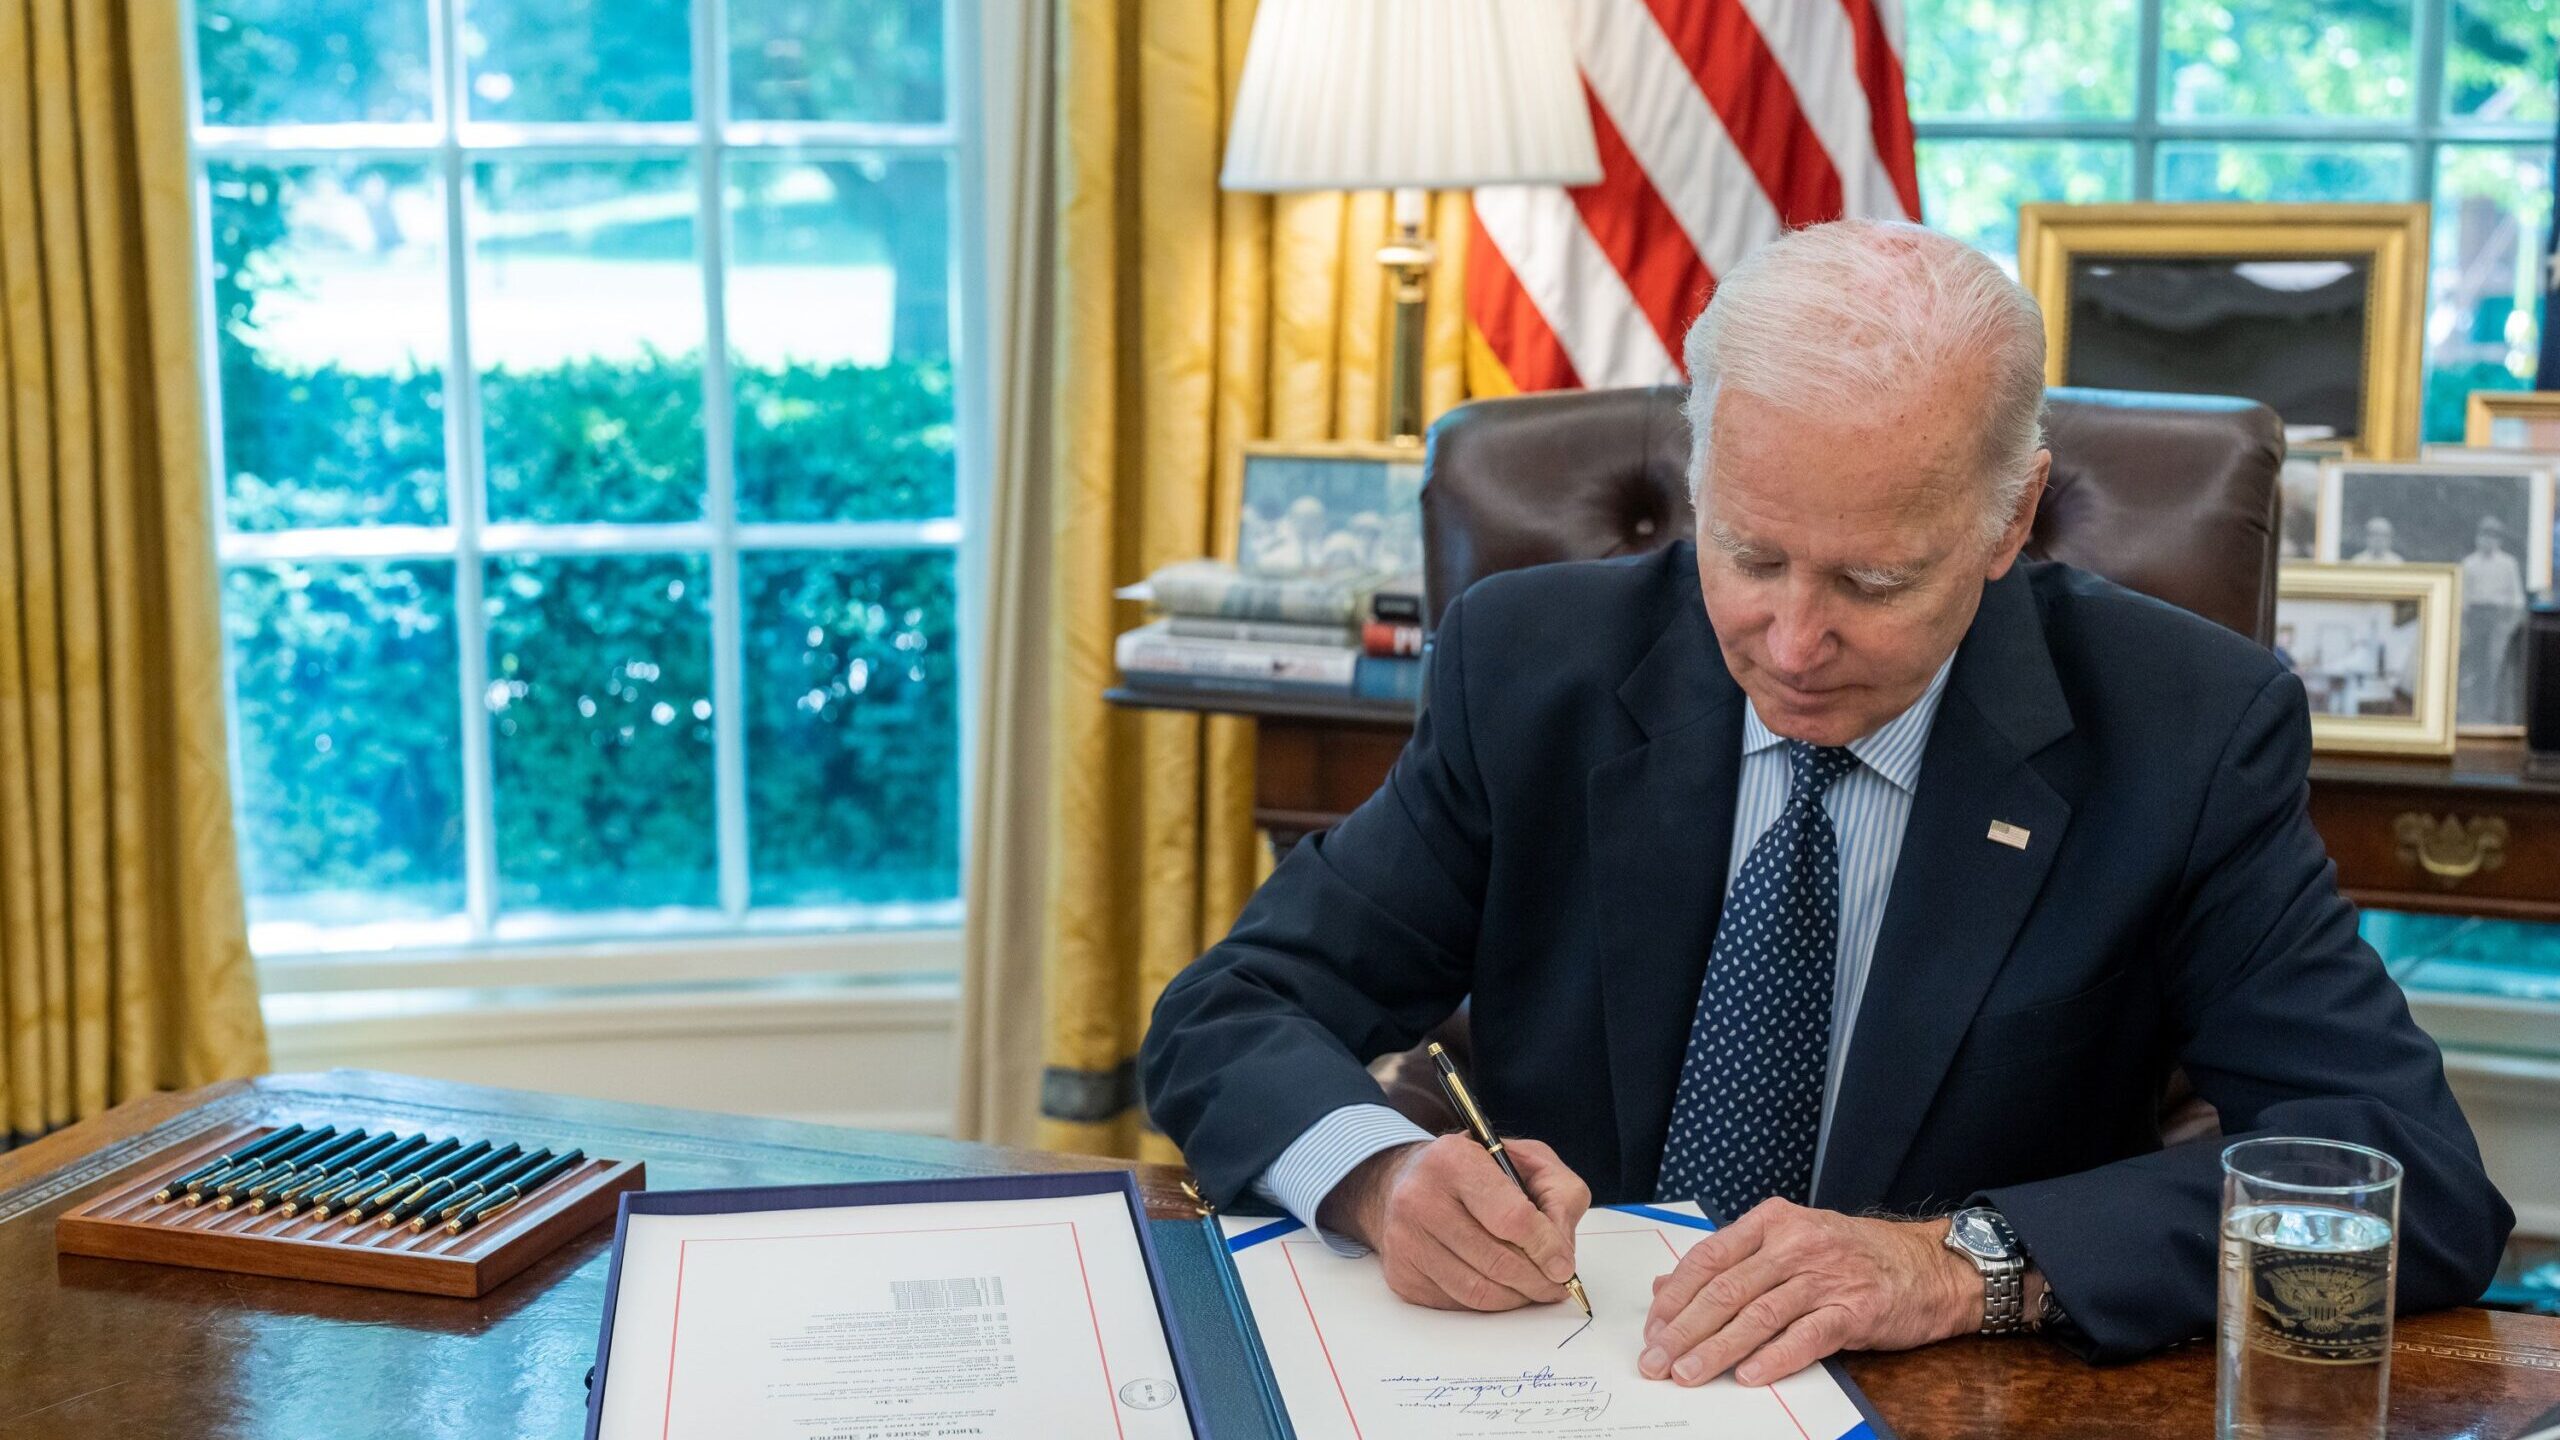 The White House Twitter account tweeted this image on June 3, 2023, saying, "Today, President Biden...